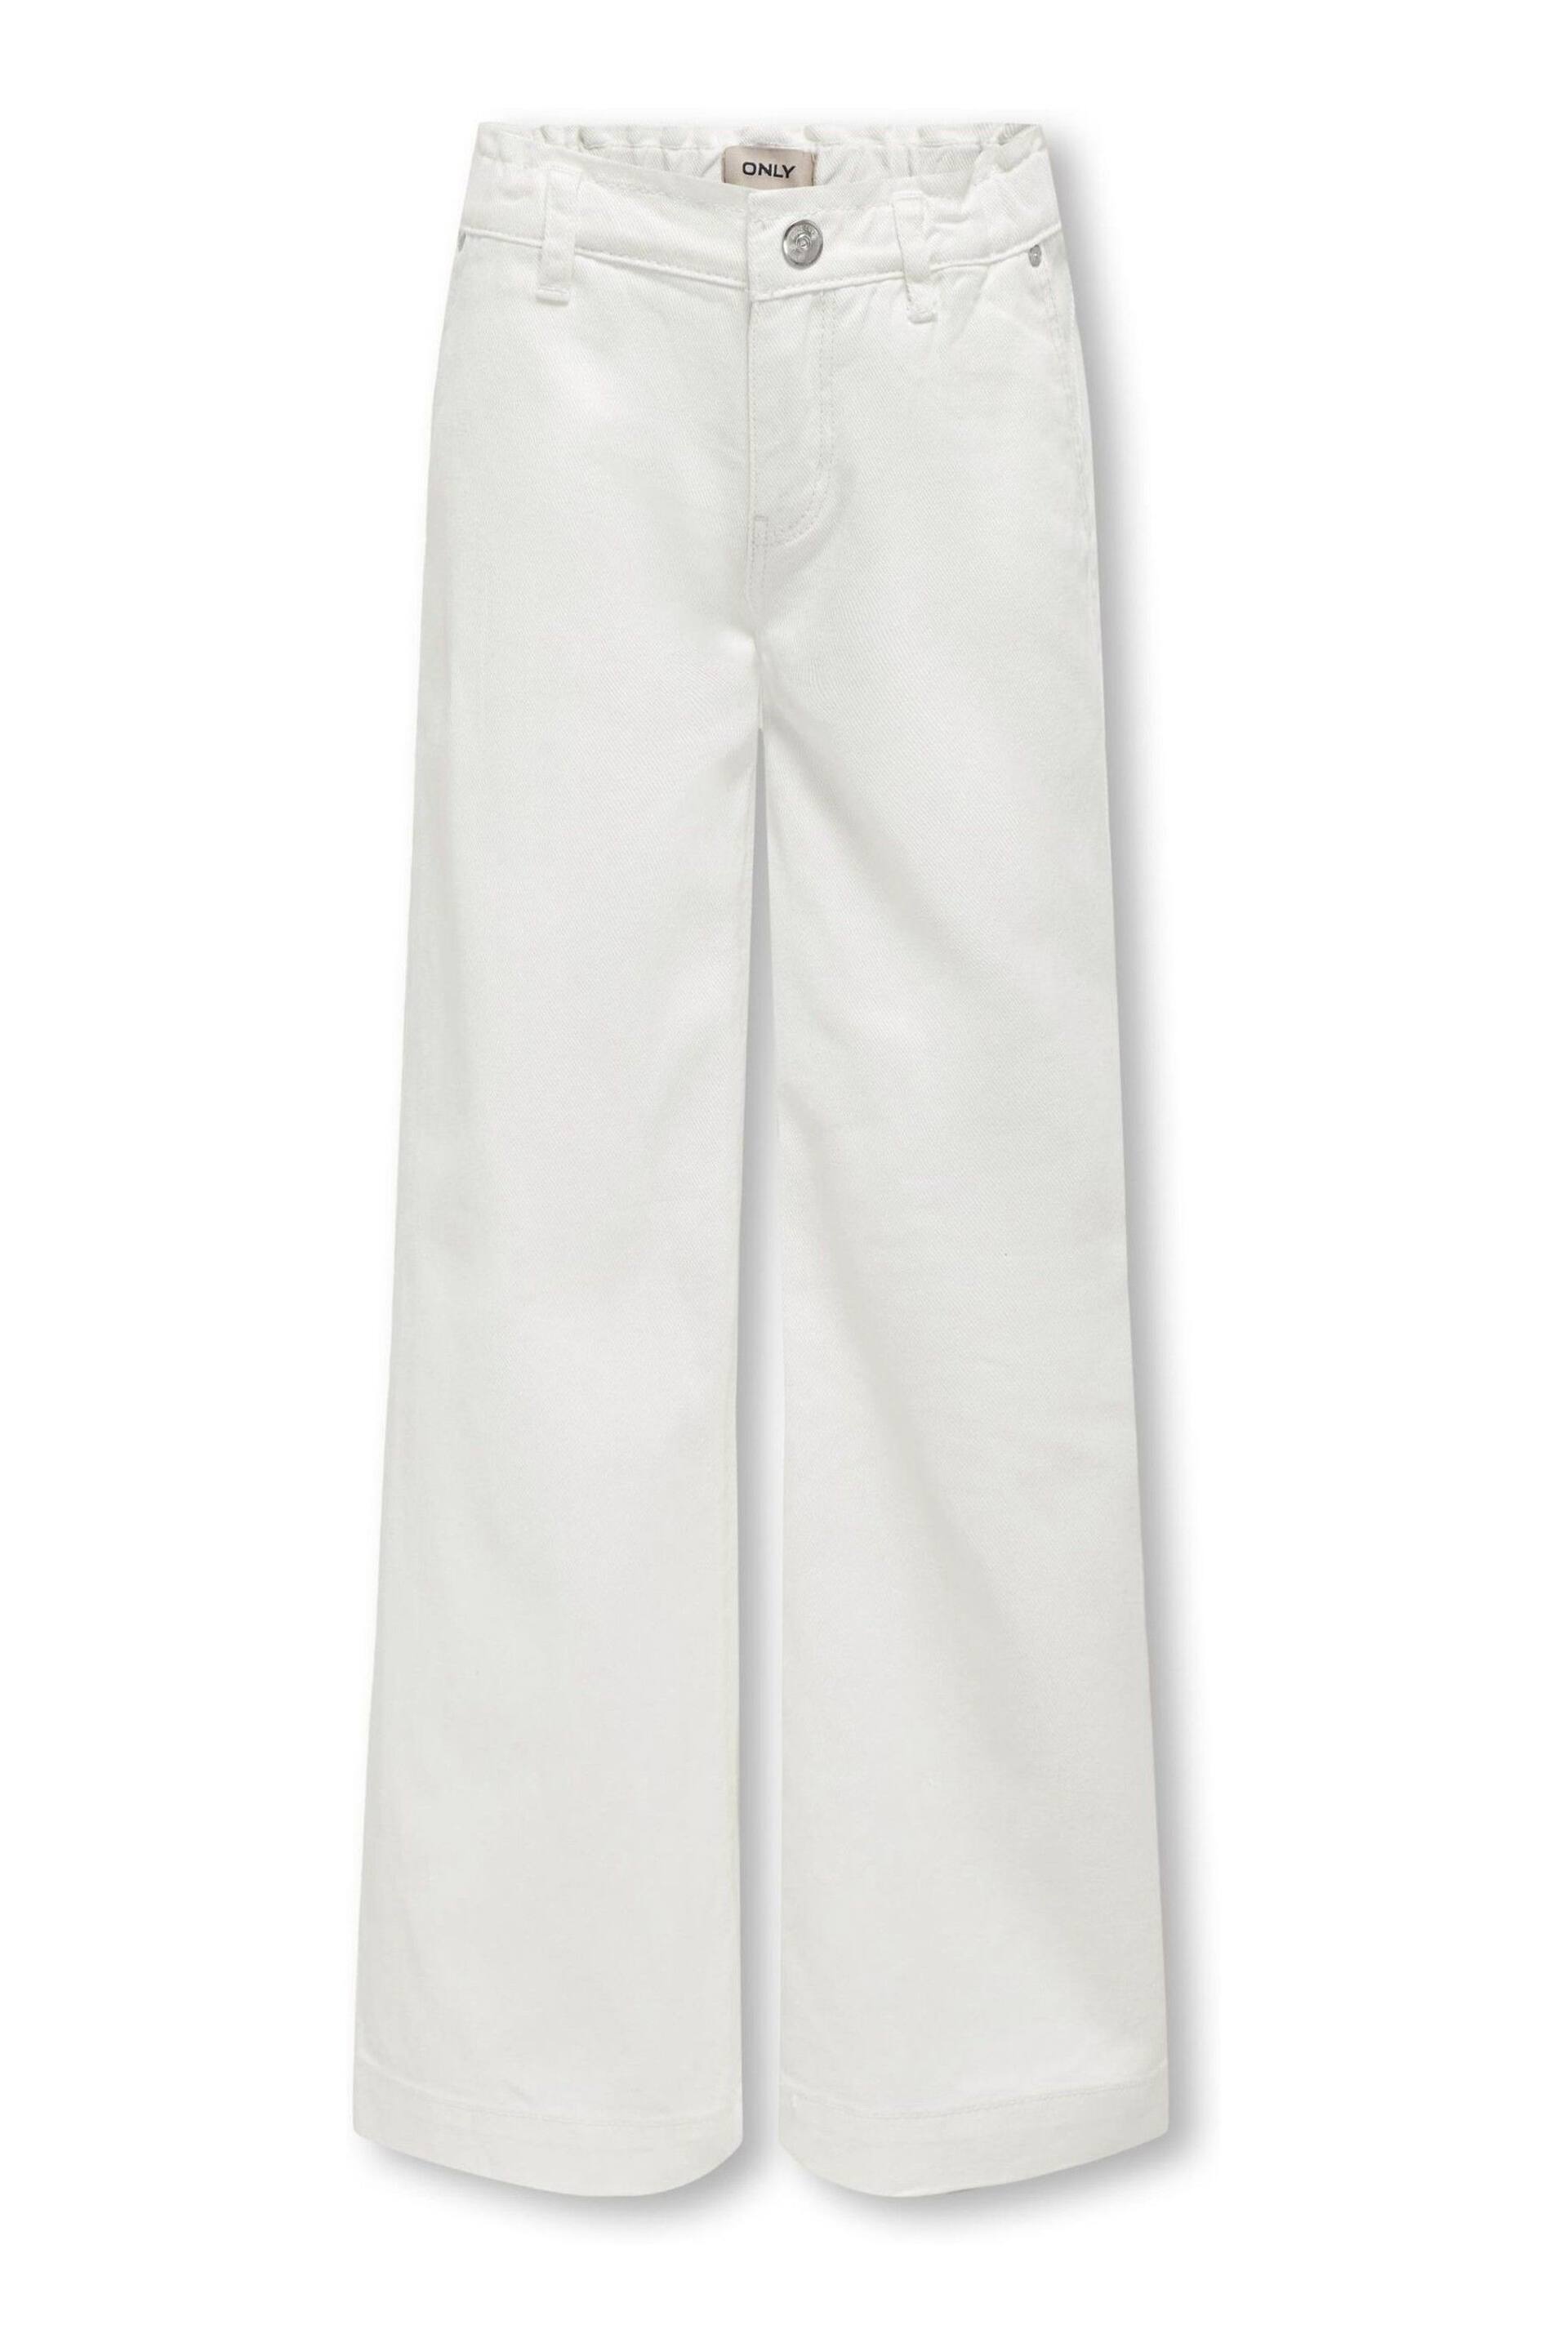 ONLY KIDS Wide Leg Adjustable Waist White Jeans - Image 1 of 2